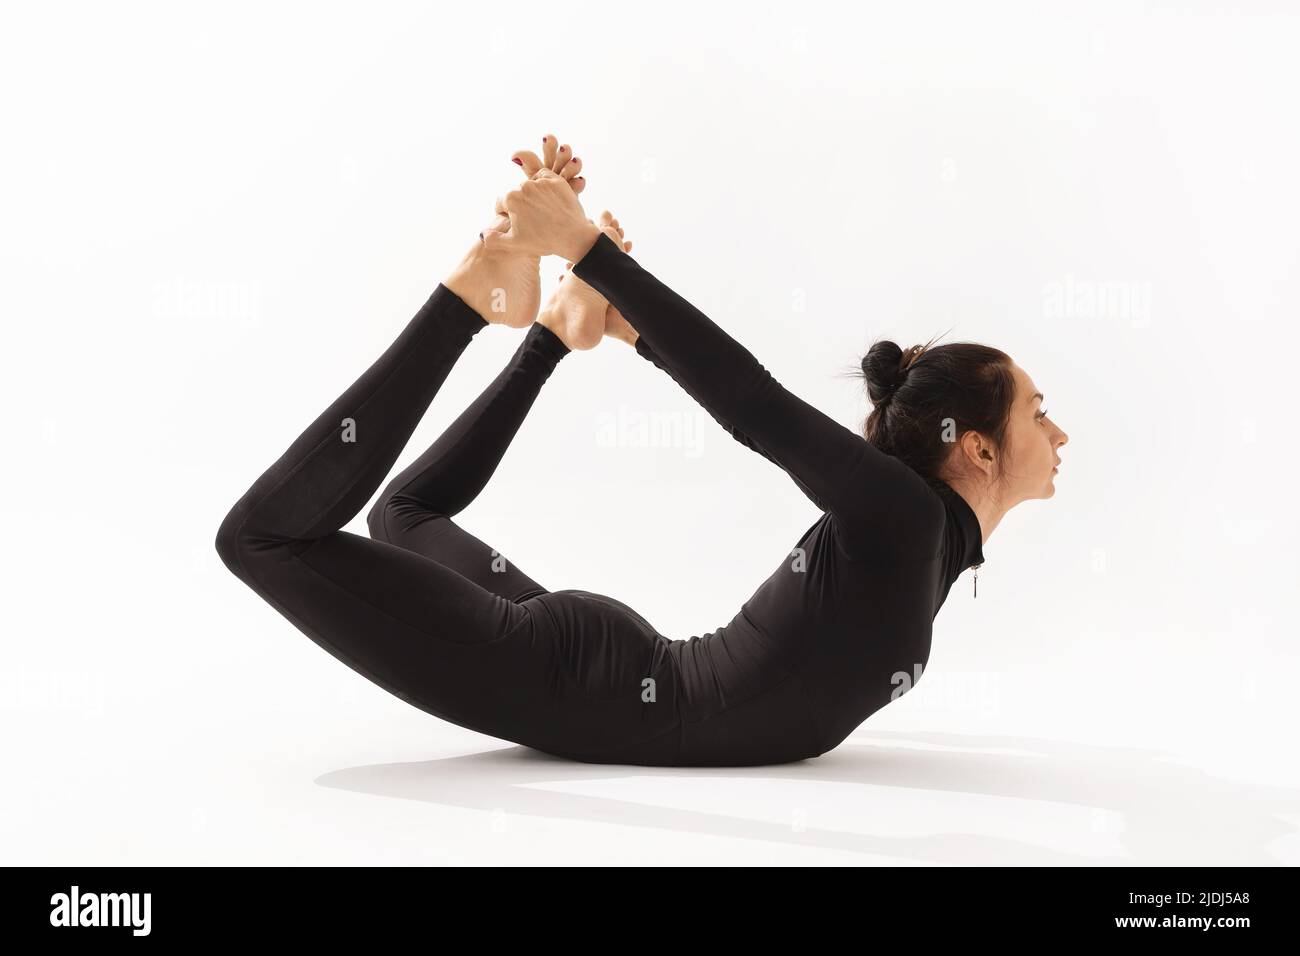 A woman in black sportswear practicing yoga performs a dhanurasana exercise, bow pose, on a white background Stock Photo